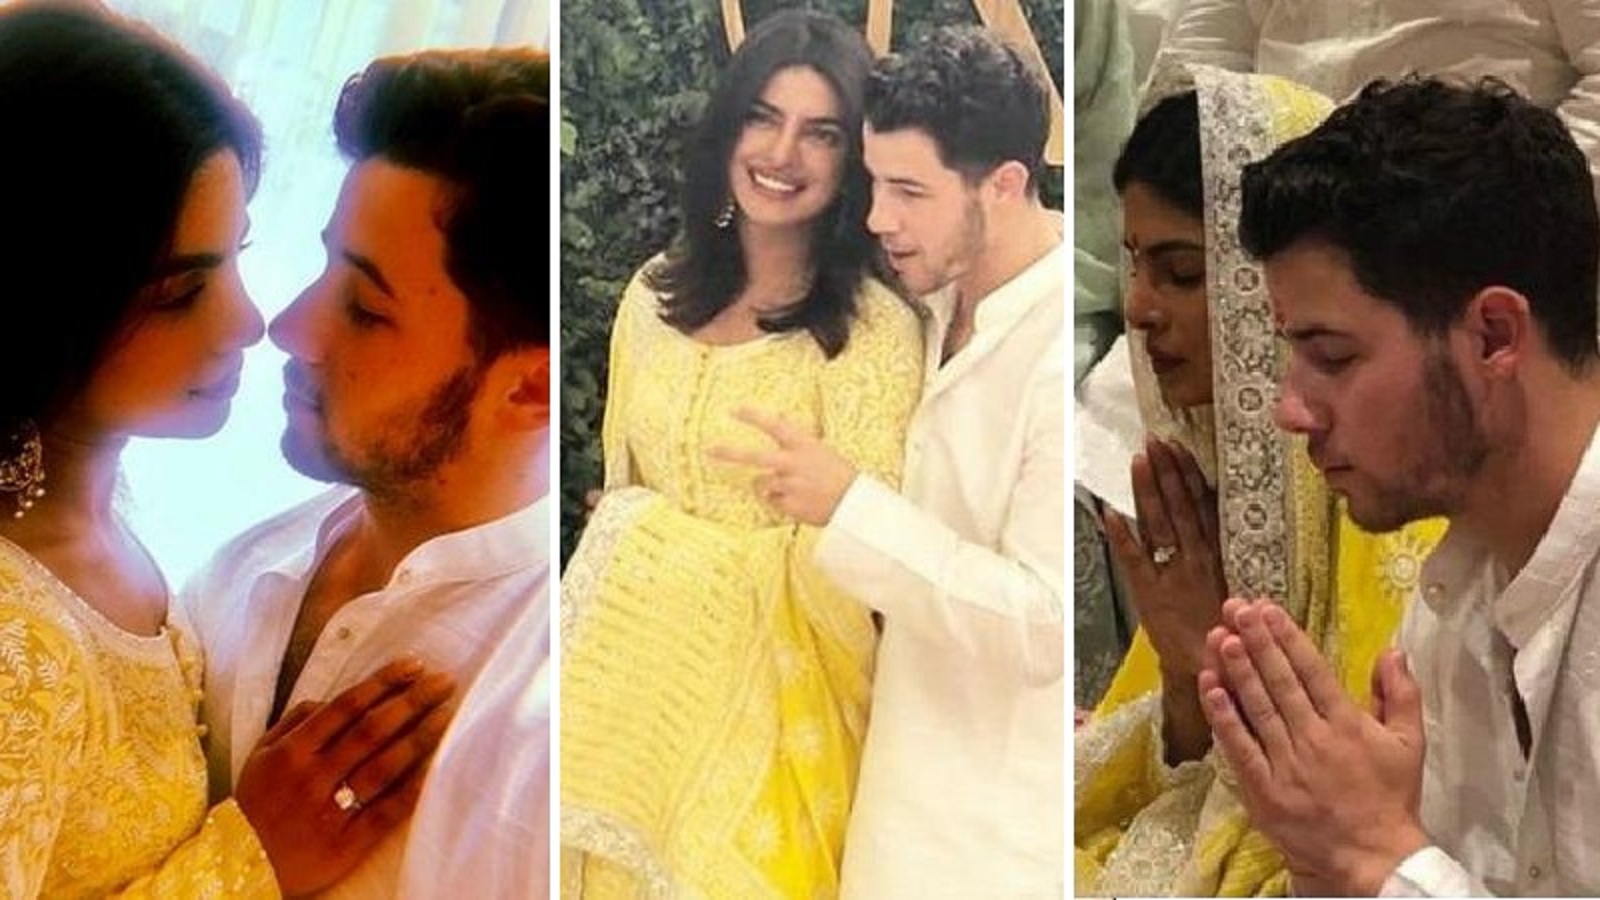 Check out all the pictures from Priyanka Chopra’s ‘Roka Ceremony’ with Nick Jonas